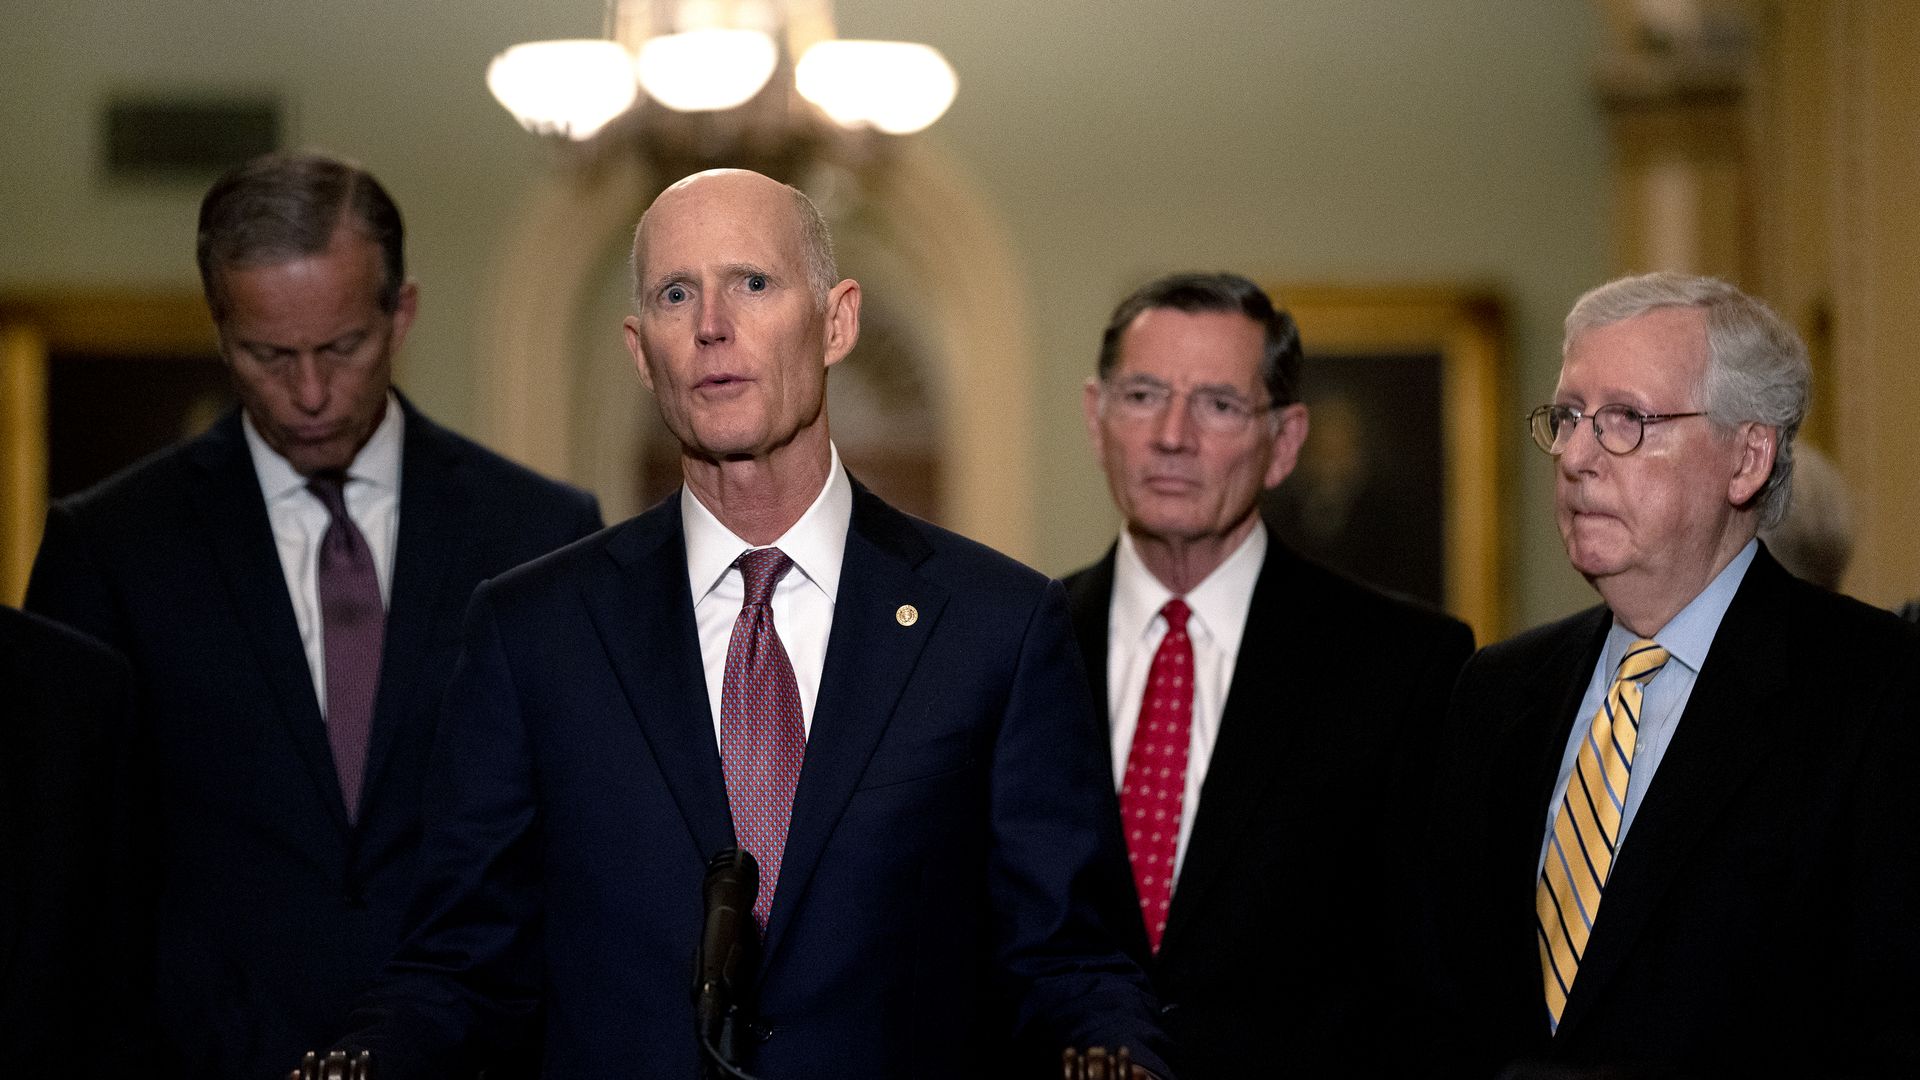 Senator Rick Scott, a Republican from Florida, speaks during a news conference